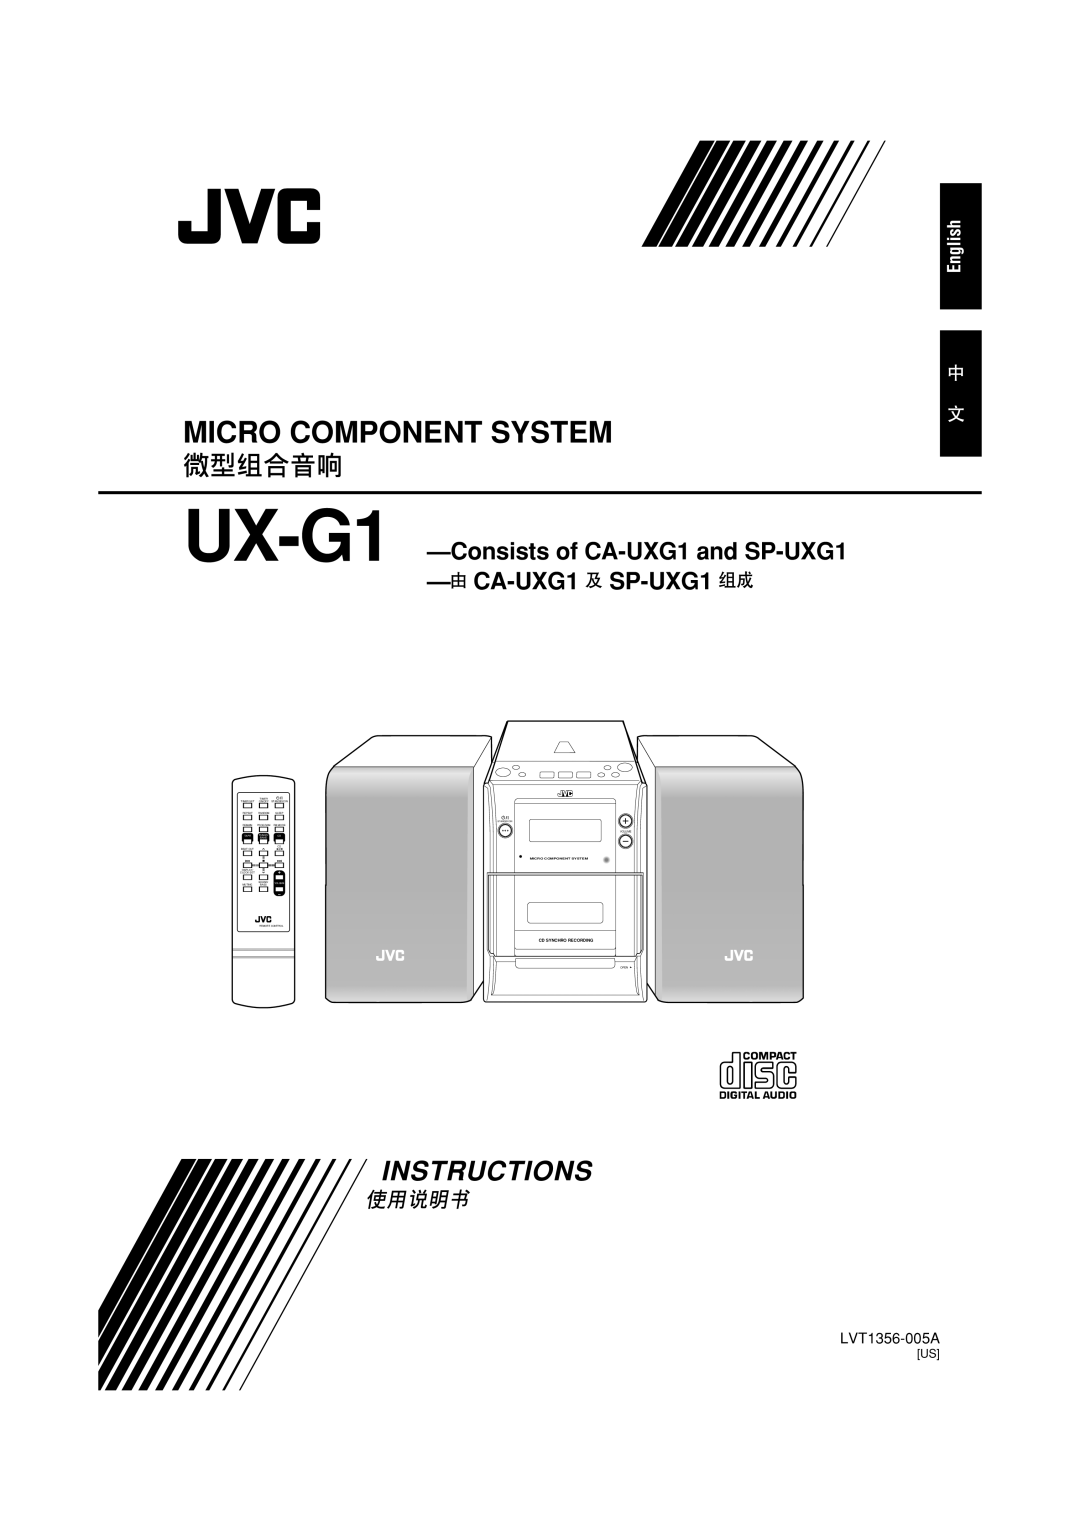 JVC LVT1356-005A manual Micro Component System, Instructions, English, Cd Synchro Recording, Volume, Open 